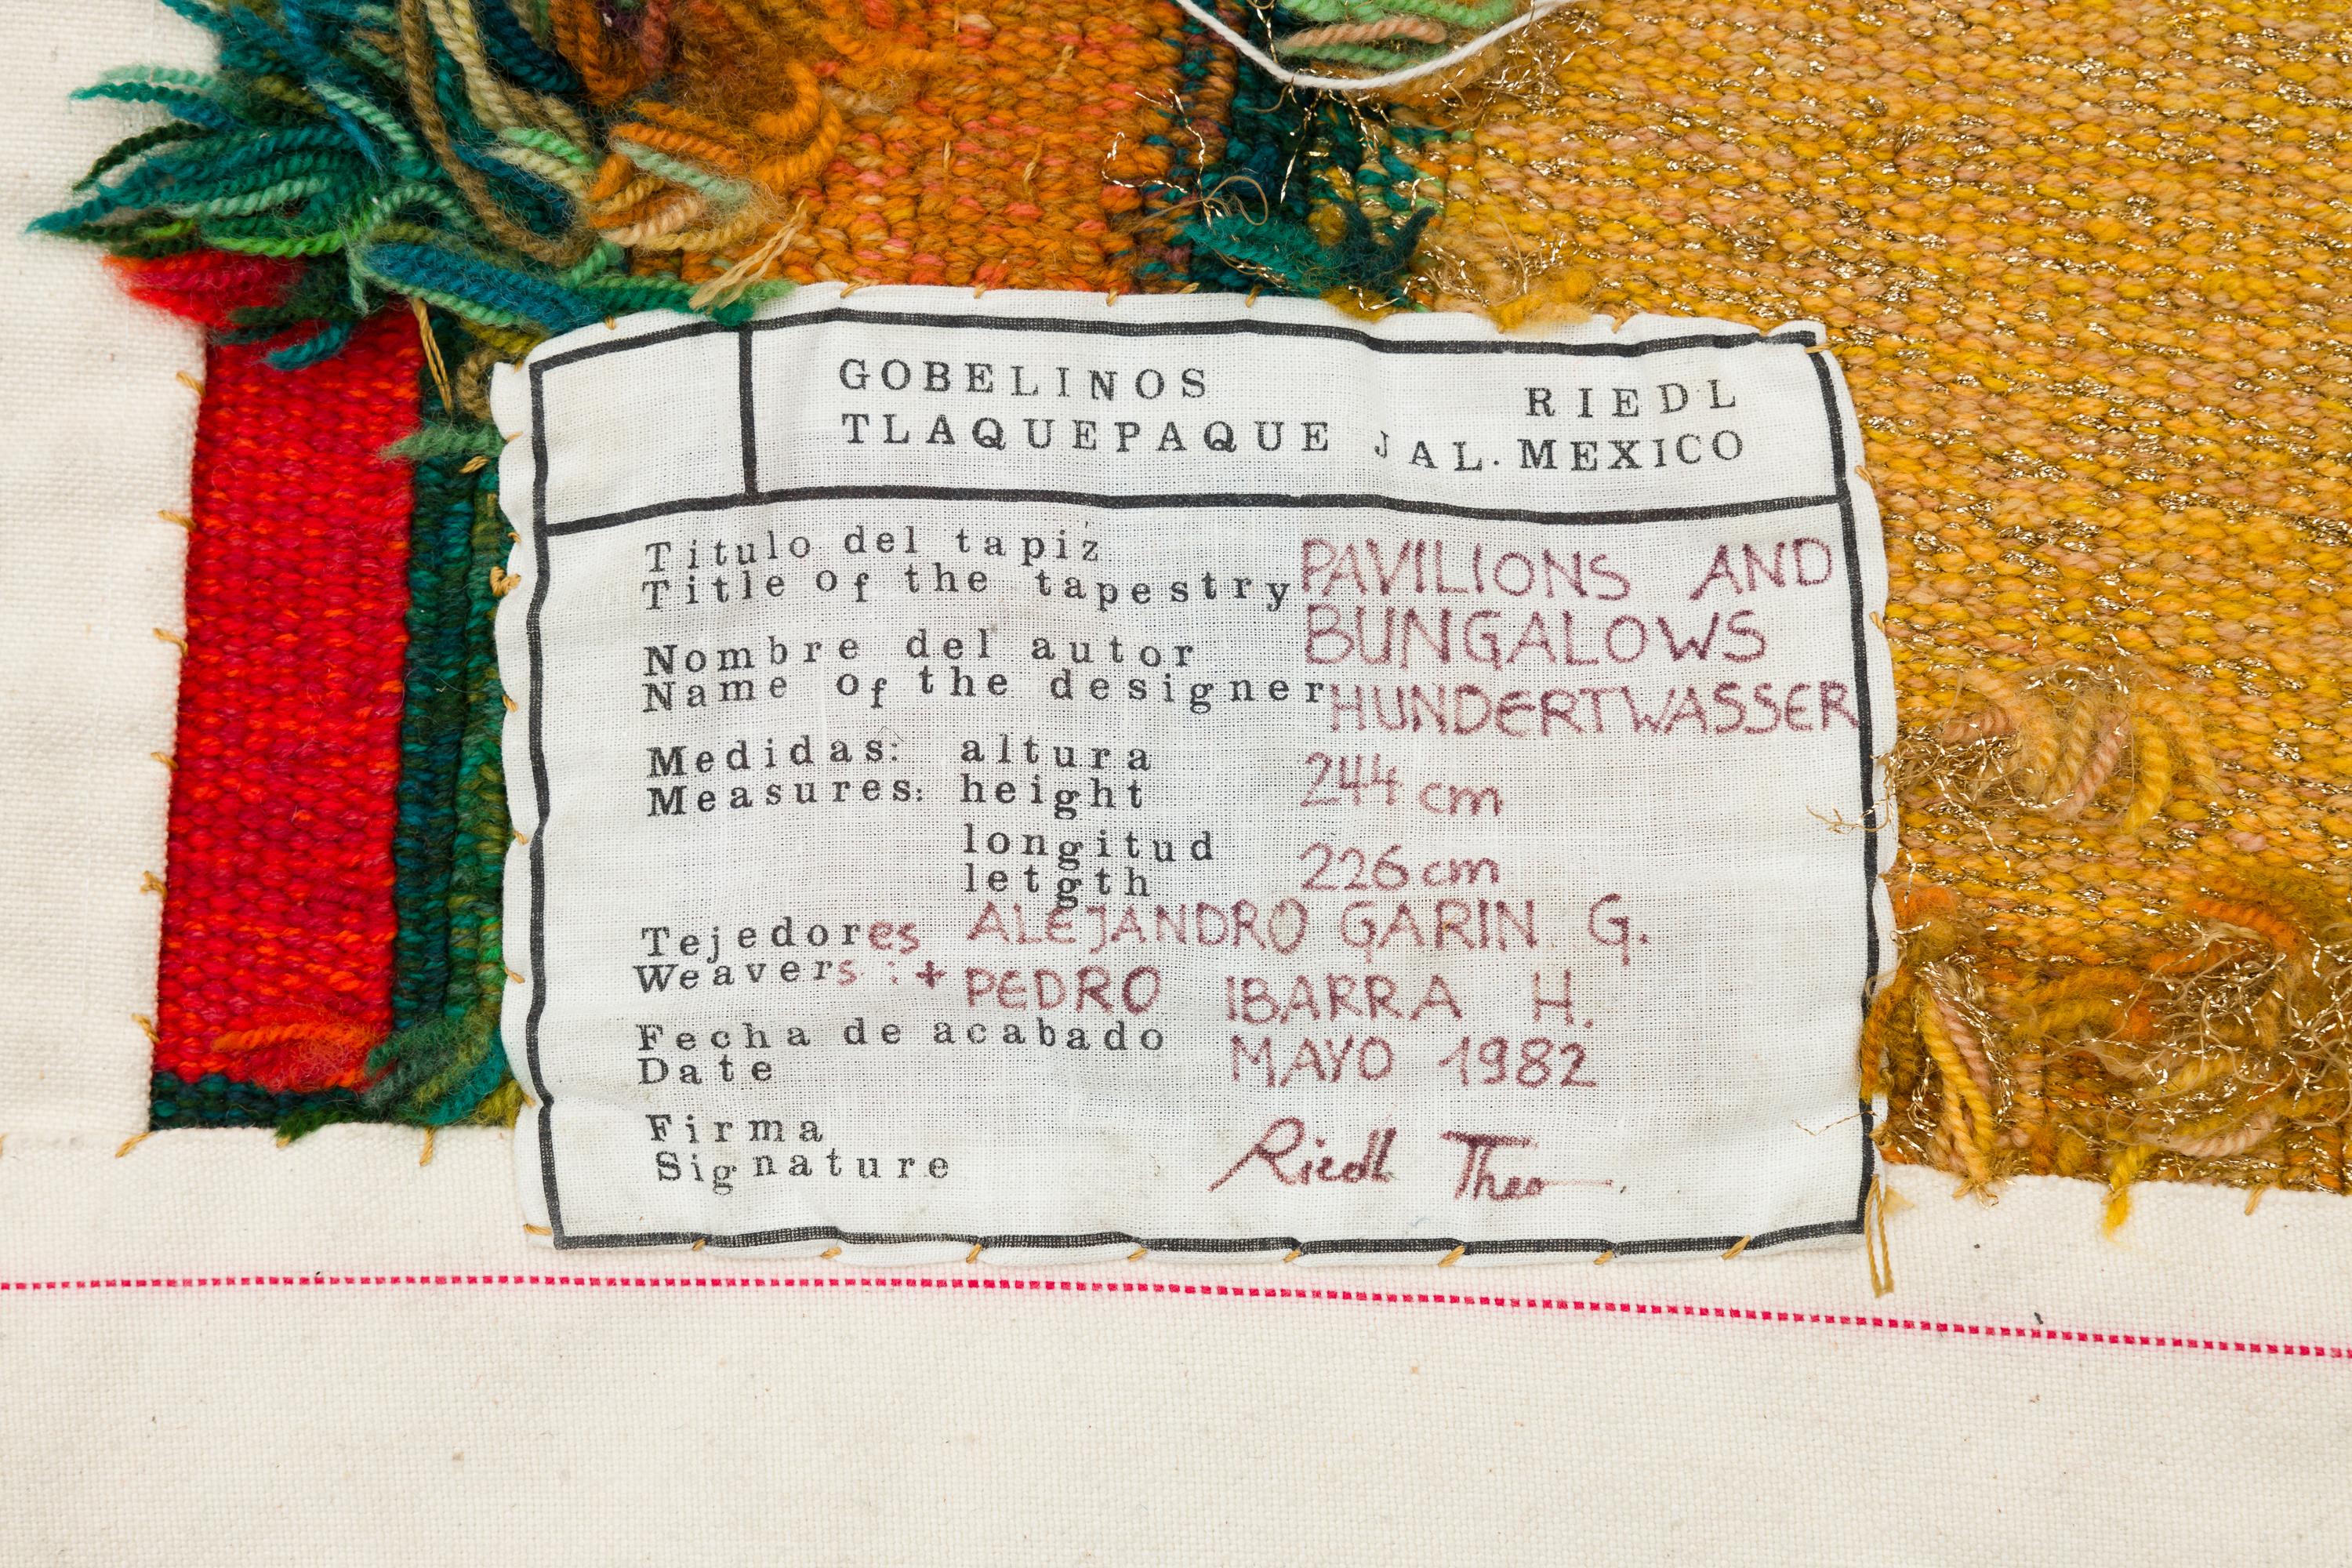 - extraordinary rug, woven from sheep's wool and linen with 4 warp threads
- company label verso with inscribtion, date and signature by Theo Riedl
- knotted by Alejandro Garin G. & Pedro Ibarra Hernandez, for Gobelinos Riedl Mexico, May 1982.
- A.